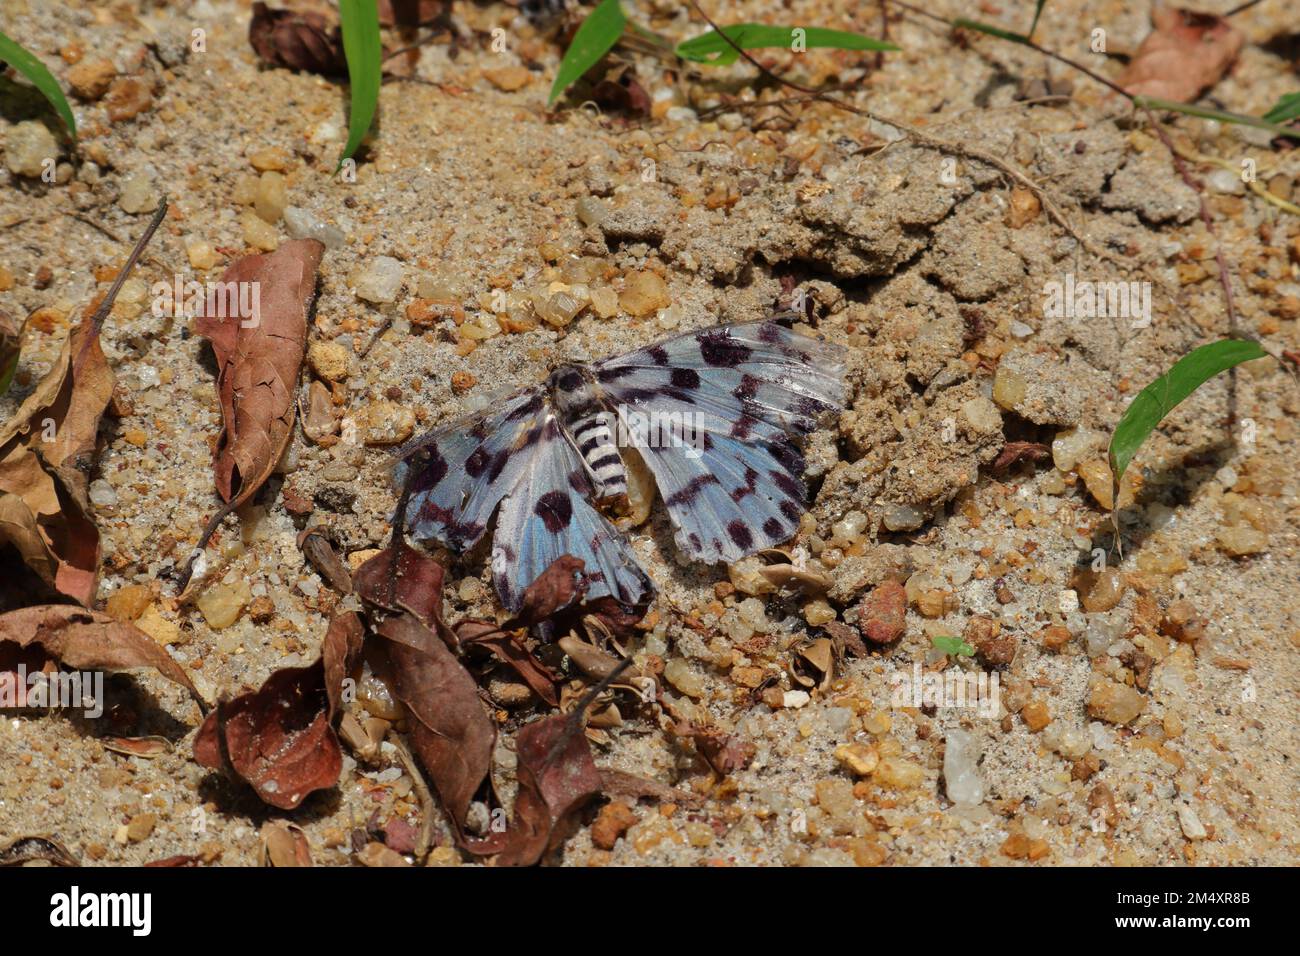 A dead butterfly with blue color and black spots on the wings is having a little bit spoiled and damaged body fall on the sandy ground Stock Photo